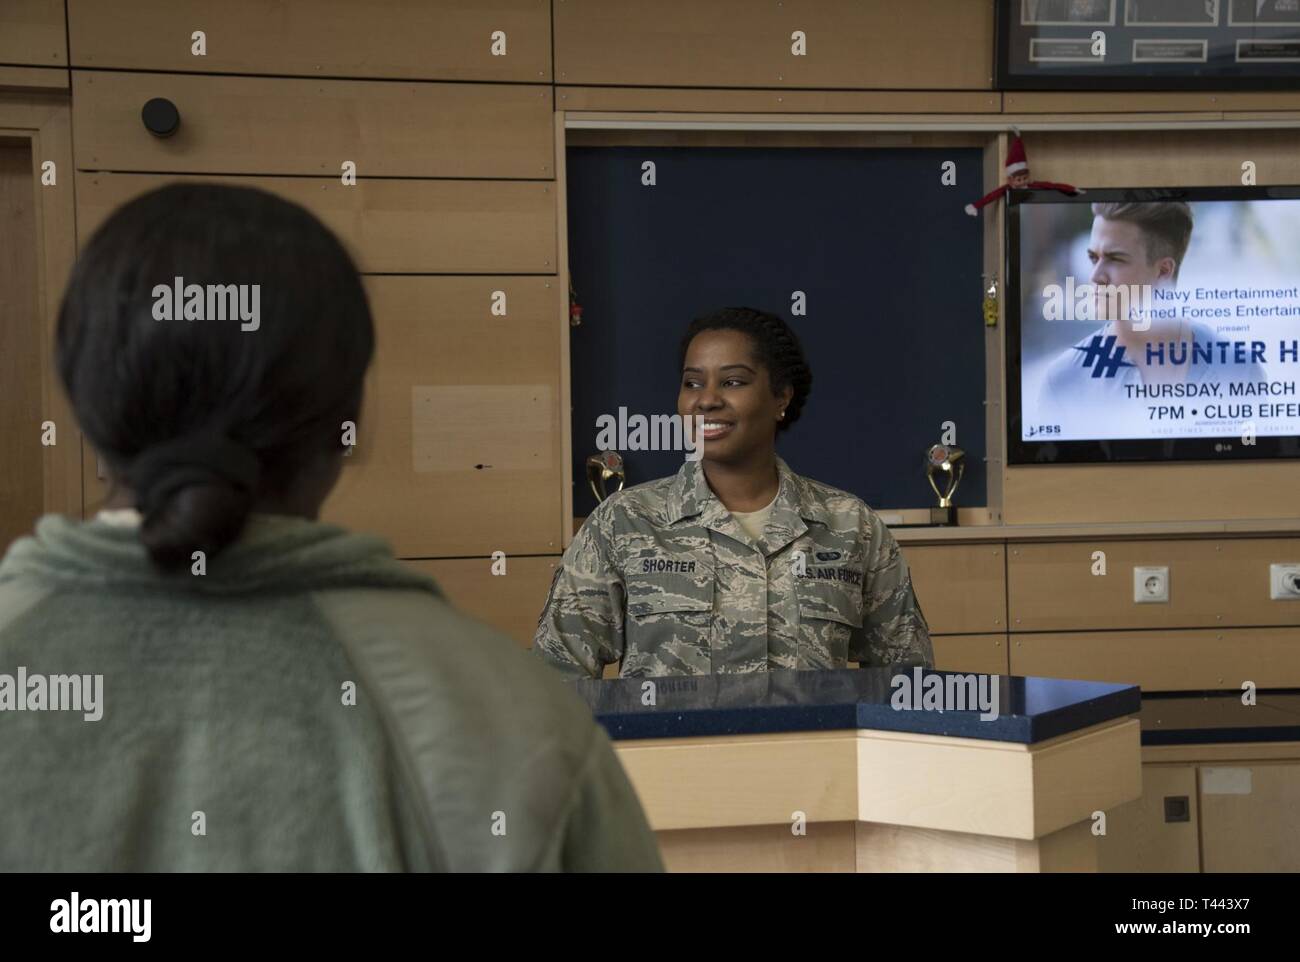 Staff Sgt. Folami Shorter, a services specialist with the 108th Force Support Squadron from Joint Base McGuire-Dix-Lakehurst, N.J., greets patrons at the George Price Gymnasium at Spangdahlem Air Base, Germany, March 13, 2019. Air National Guard services specialists manned the front desk and assisted with required physical fitness tests for the 52nd Fighter Wing's active duty Airmen during the guard unit's two-week annual training. Stock Photo